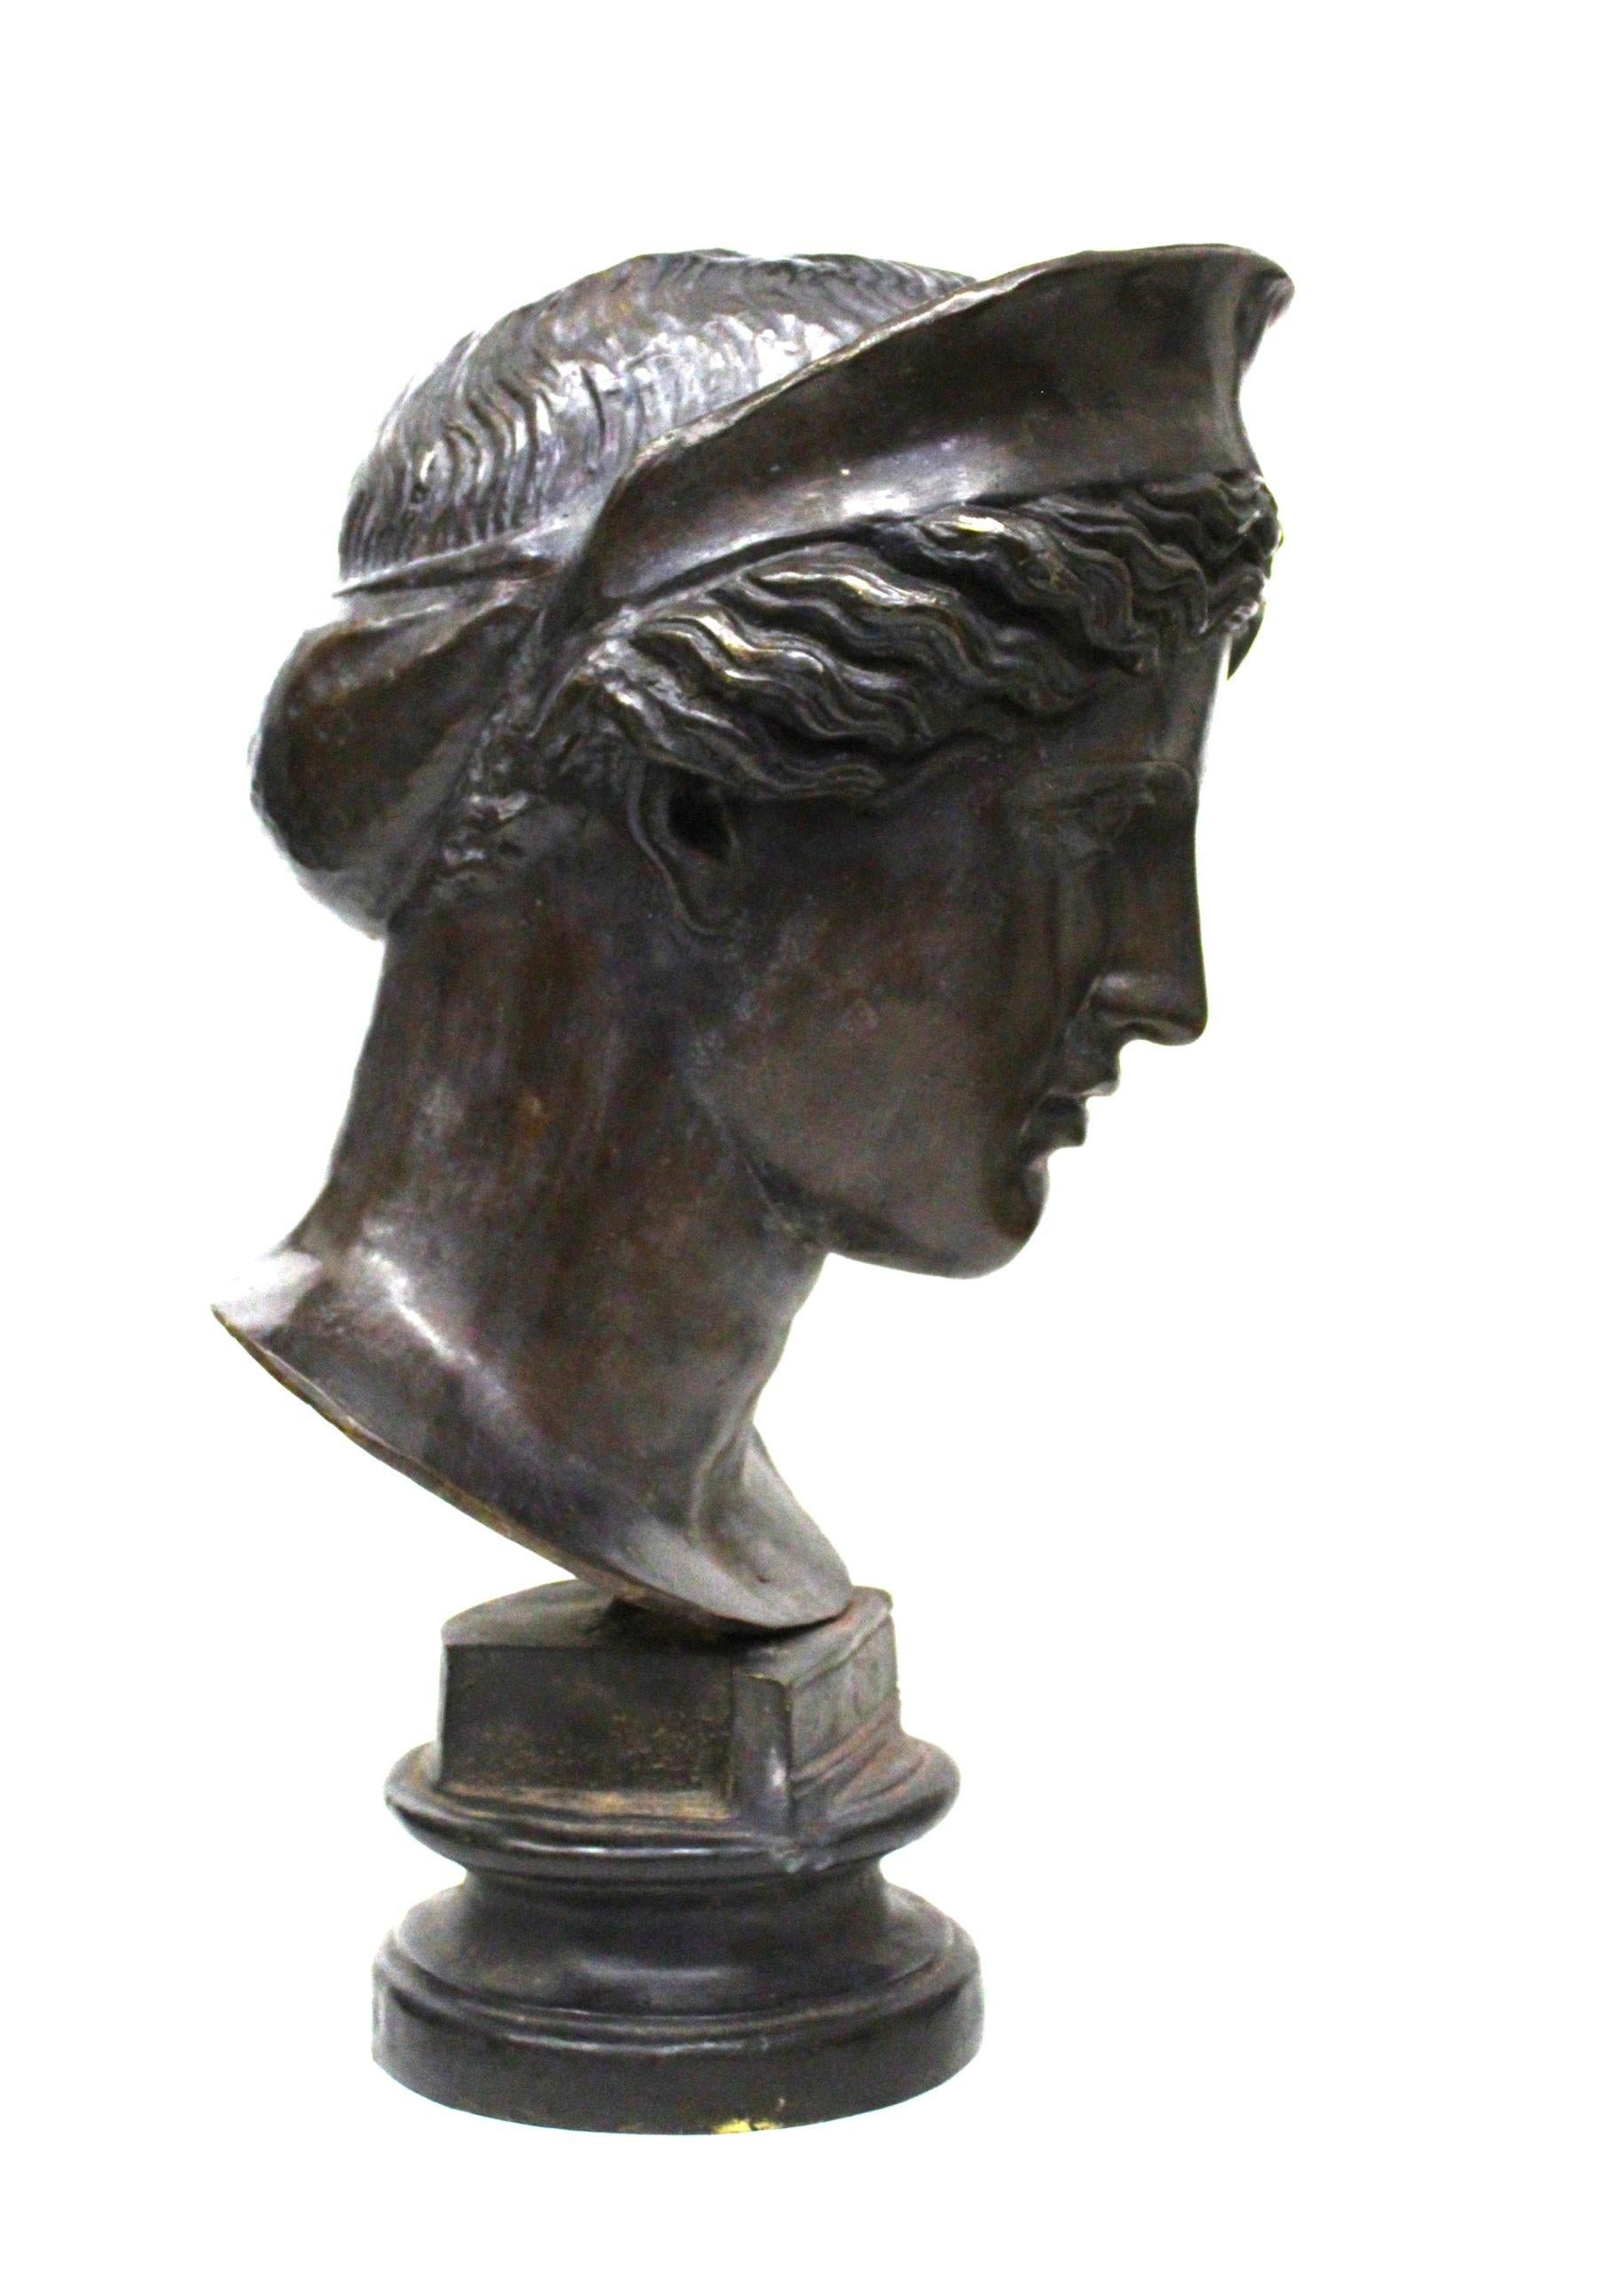 Description
Bronze sculpture of Hera, Greek divinity. ADDITIONAL PHOTOS, INFORMATION OF THE LOT AND SHIPPING INFORMATION CAN BE REQUEST BY SENDING AN EMAIL. Indicative shipping costs in Italy: 130€ and Europe: 250€. 
Tags: Scultura, Hera, divinità